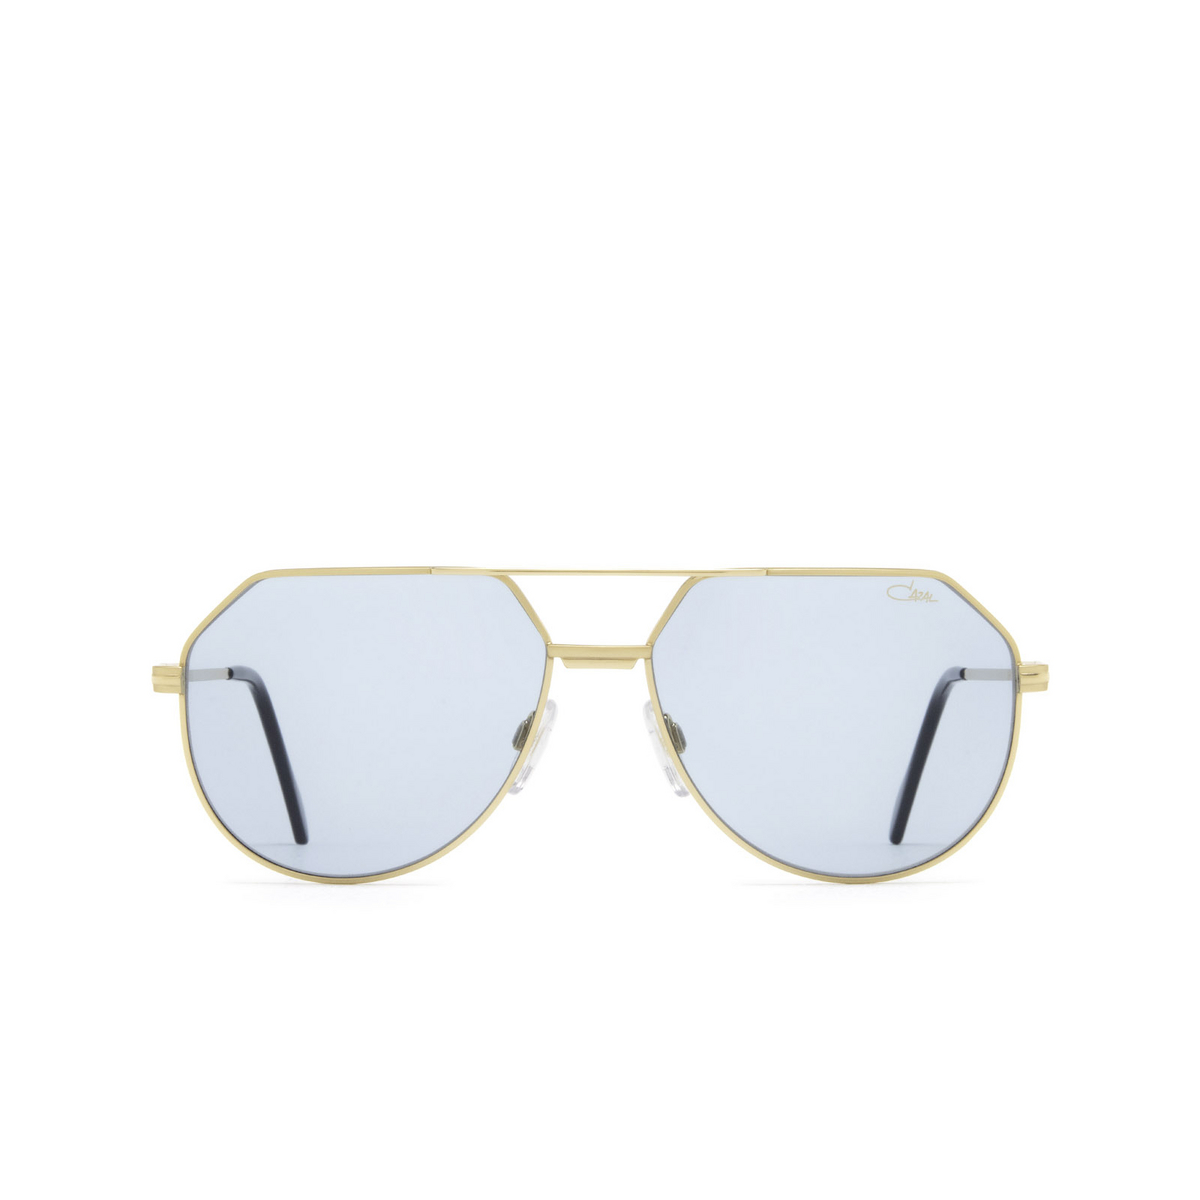 Cazal 724/3 Sunglasses 004 Gold - front view